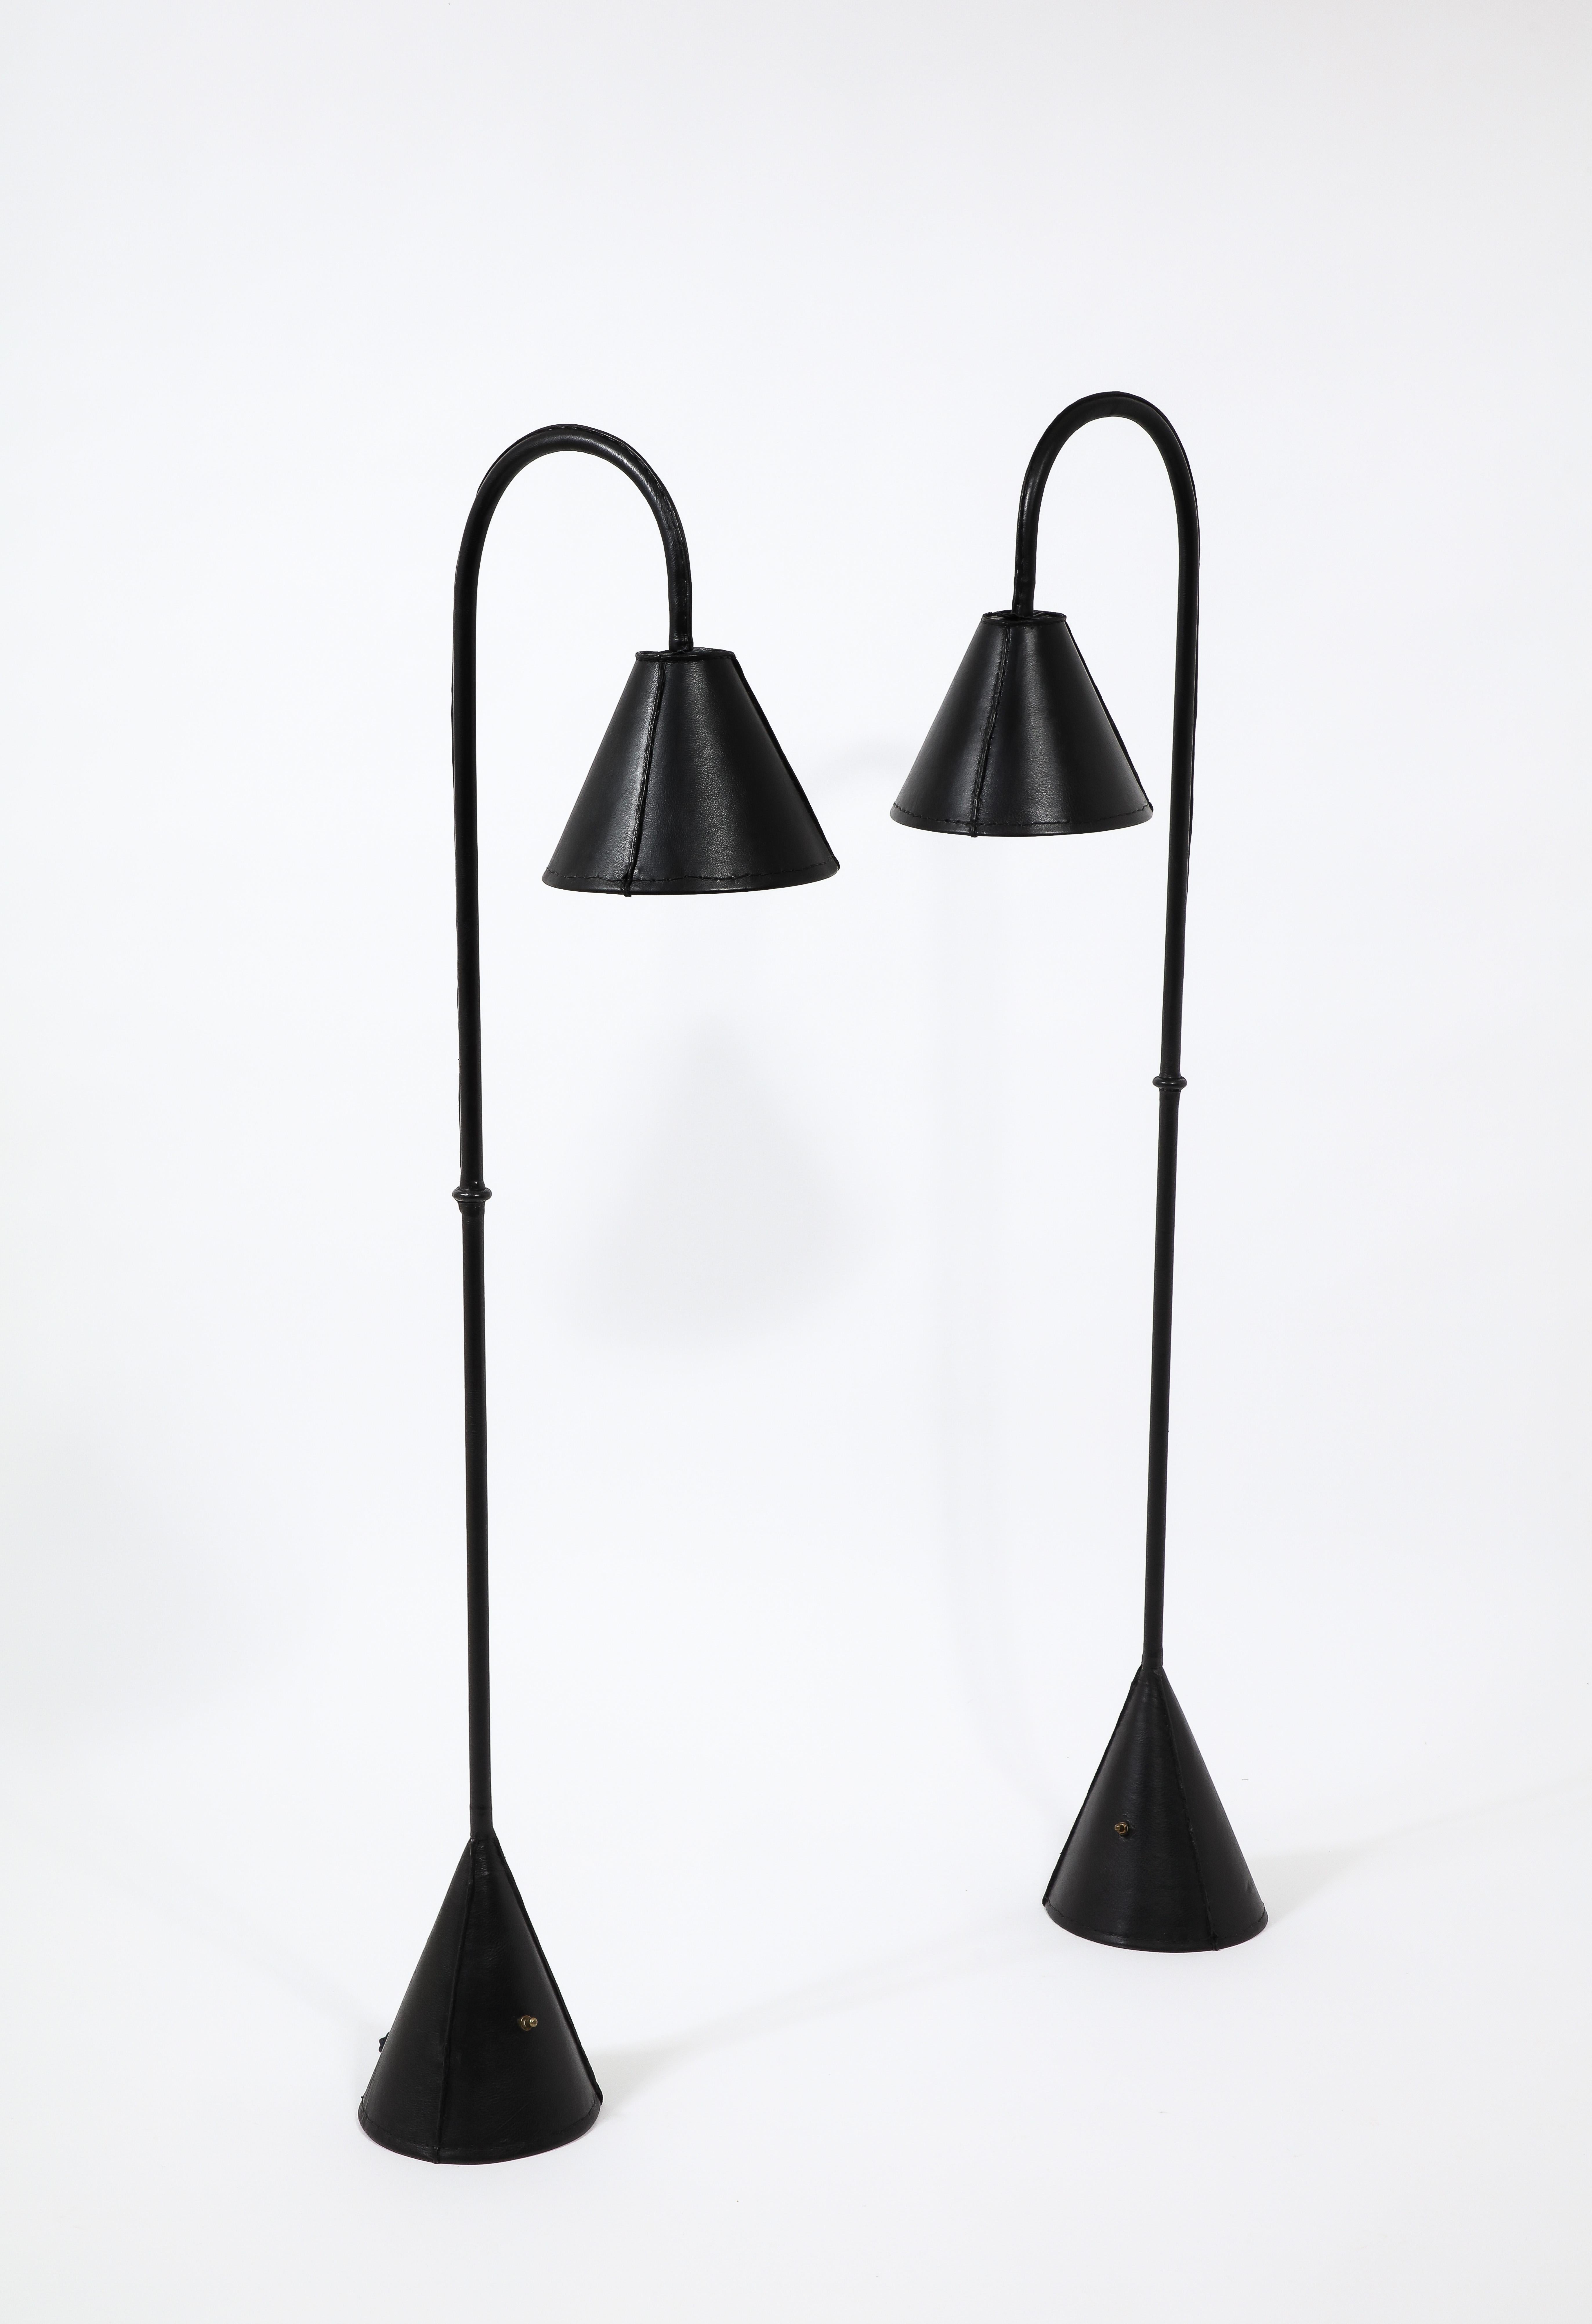 Valenti Reading Lamps in Stitched Leather, France 1960's For Sale 2